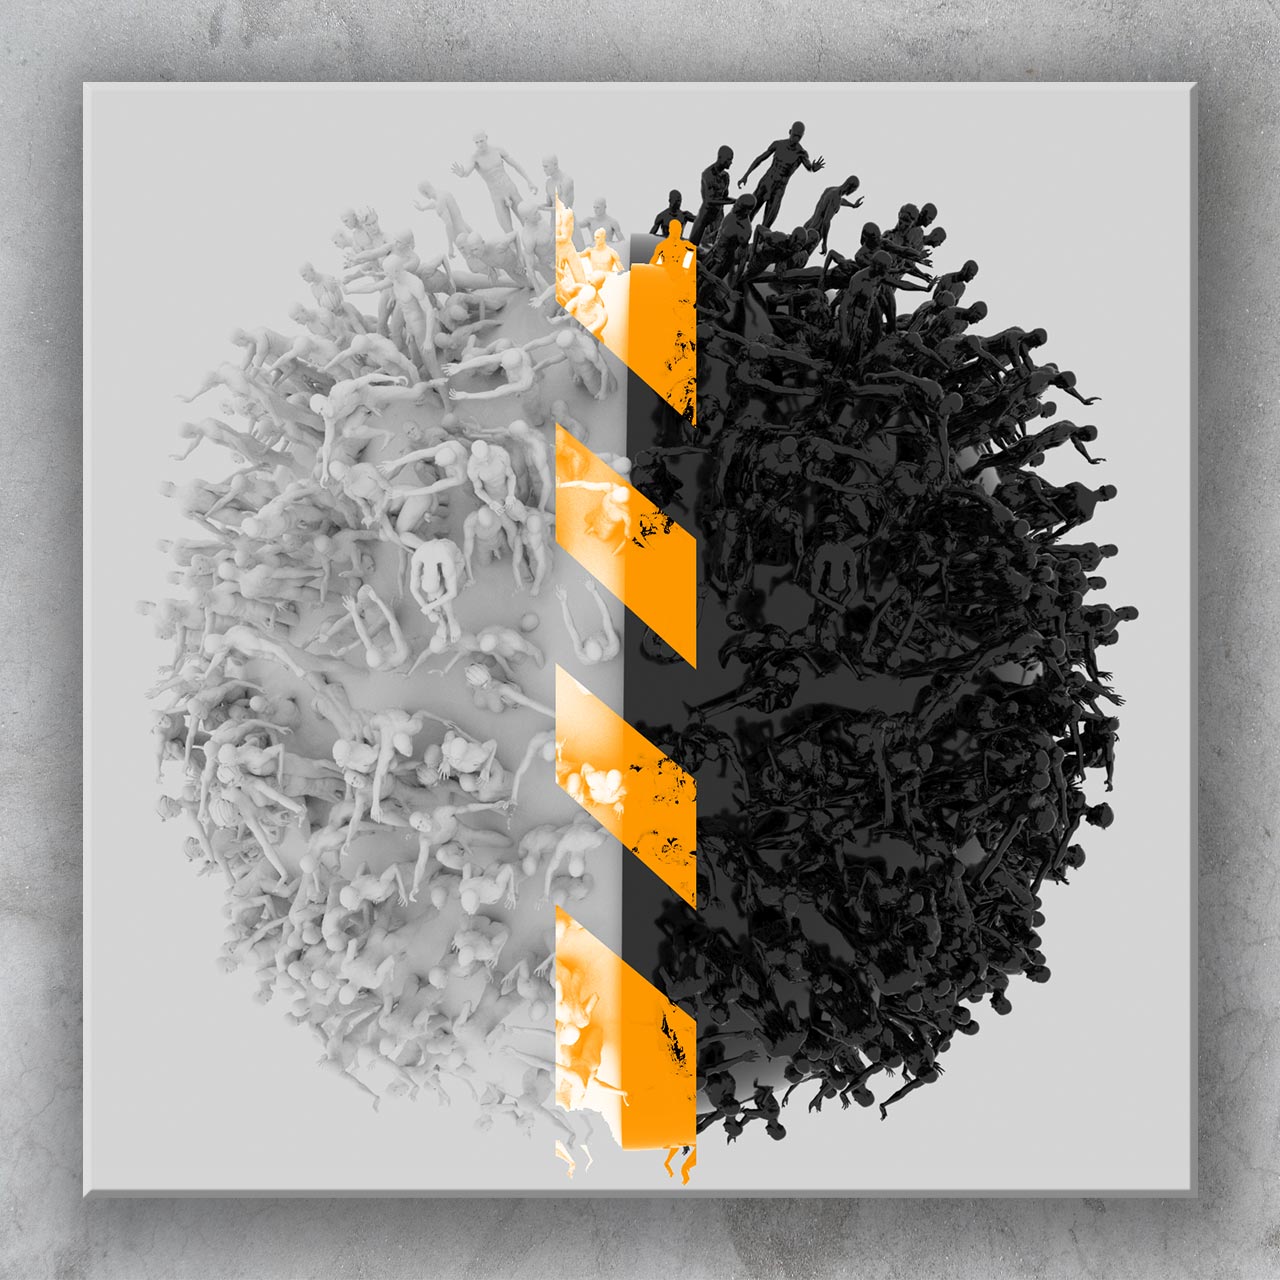 <strong>Dimension:</strong> 90 x 90 cm <strong>Technique:</strong> CGI, print on canvas <strong>Edition:</strong> 1/3 <strong>Status:</strong> available